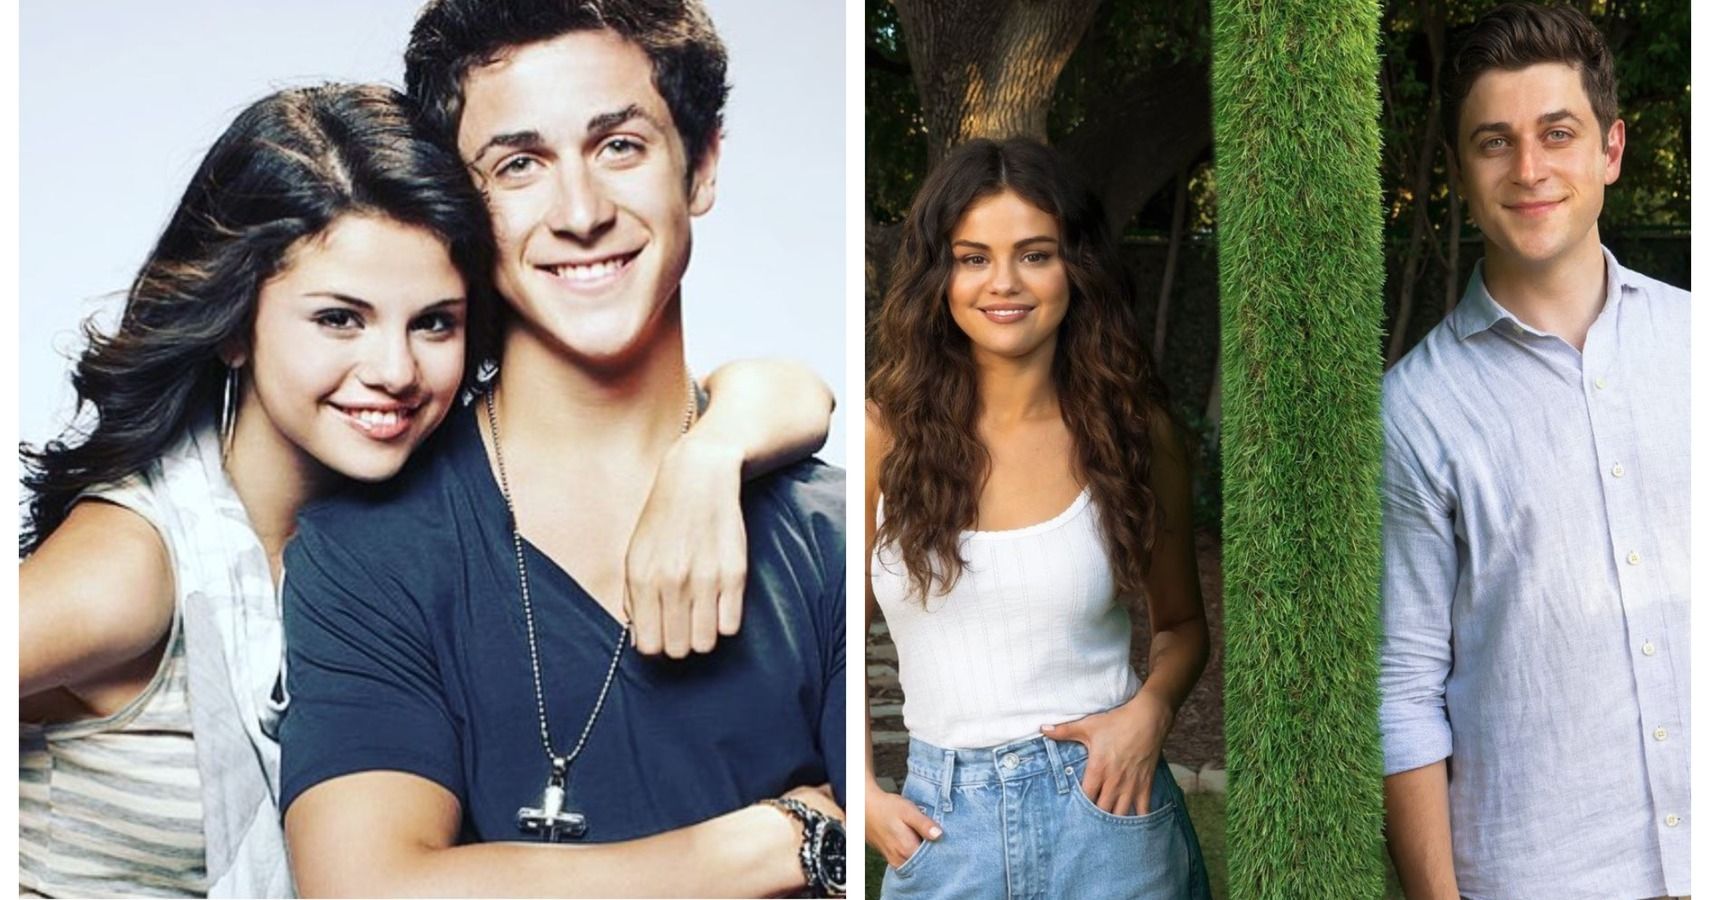 wizards of waverly place cast now